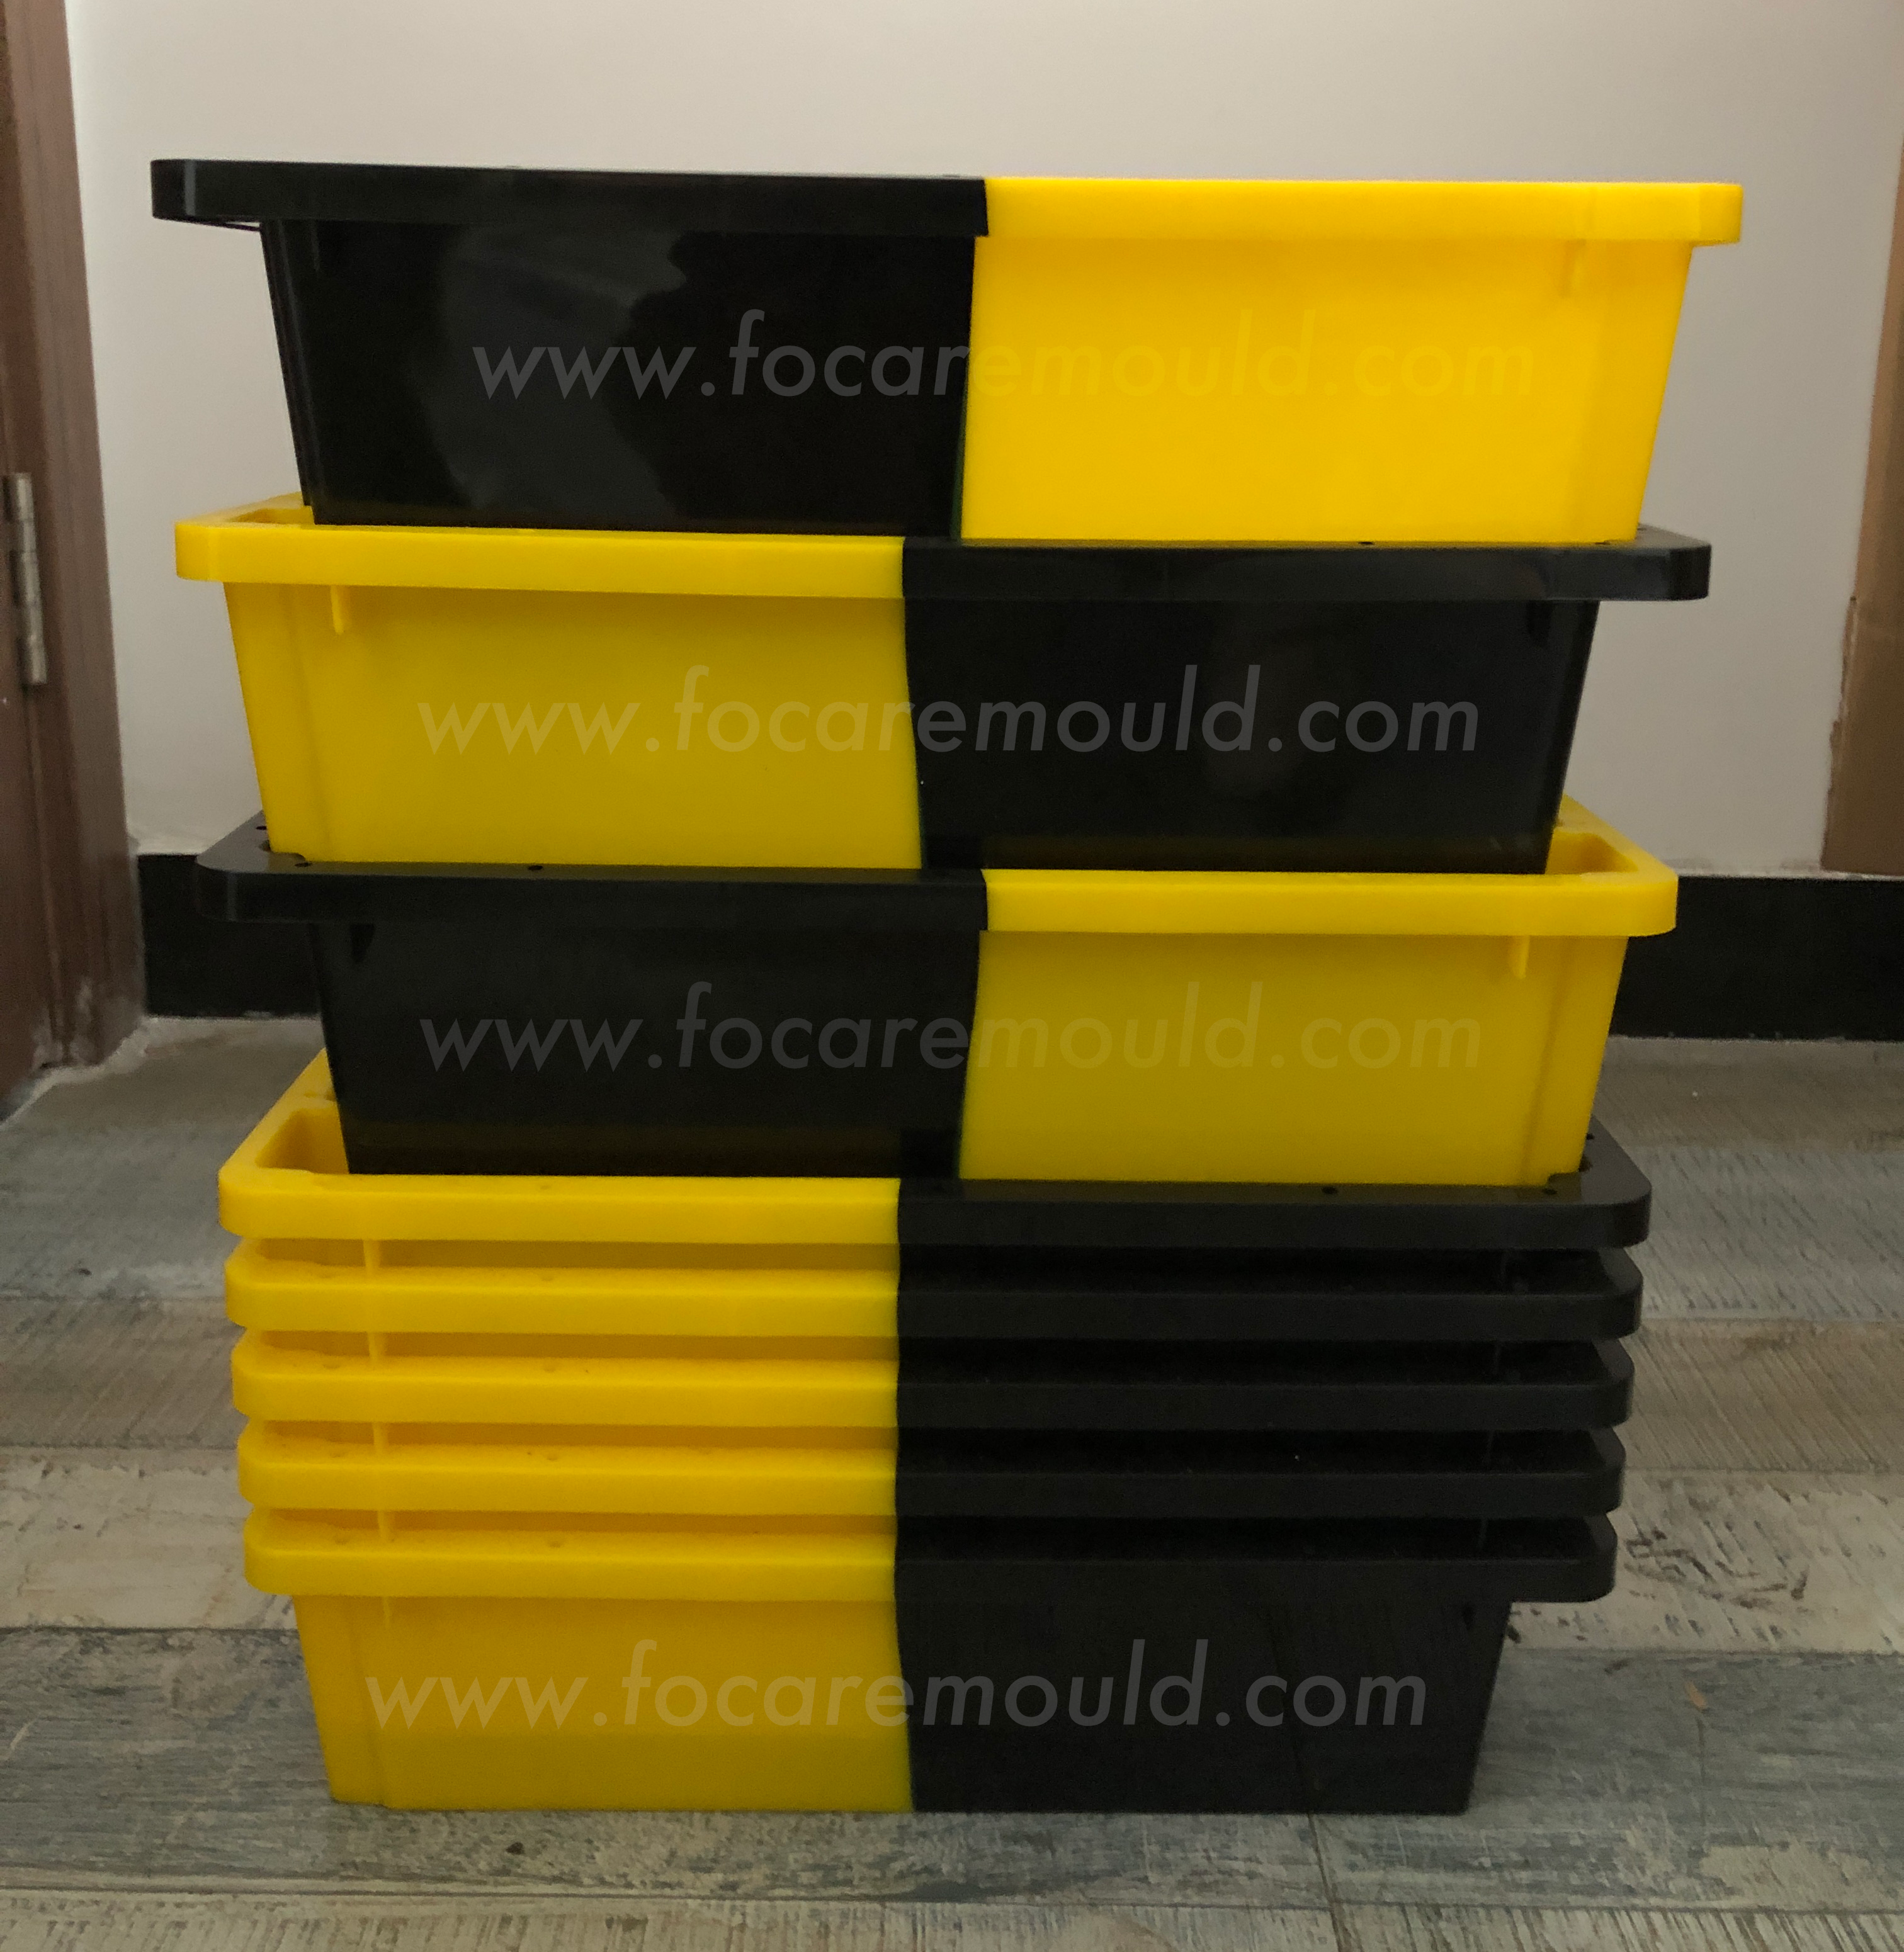 High quality Two-color stackable crate storage box mold Quotes,China Two-color stackable crate storage box mold Factory,Two-color stackable crate storage box mold Purchasing